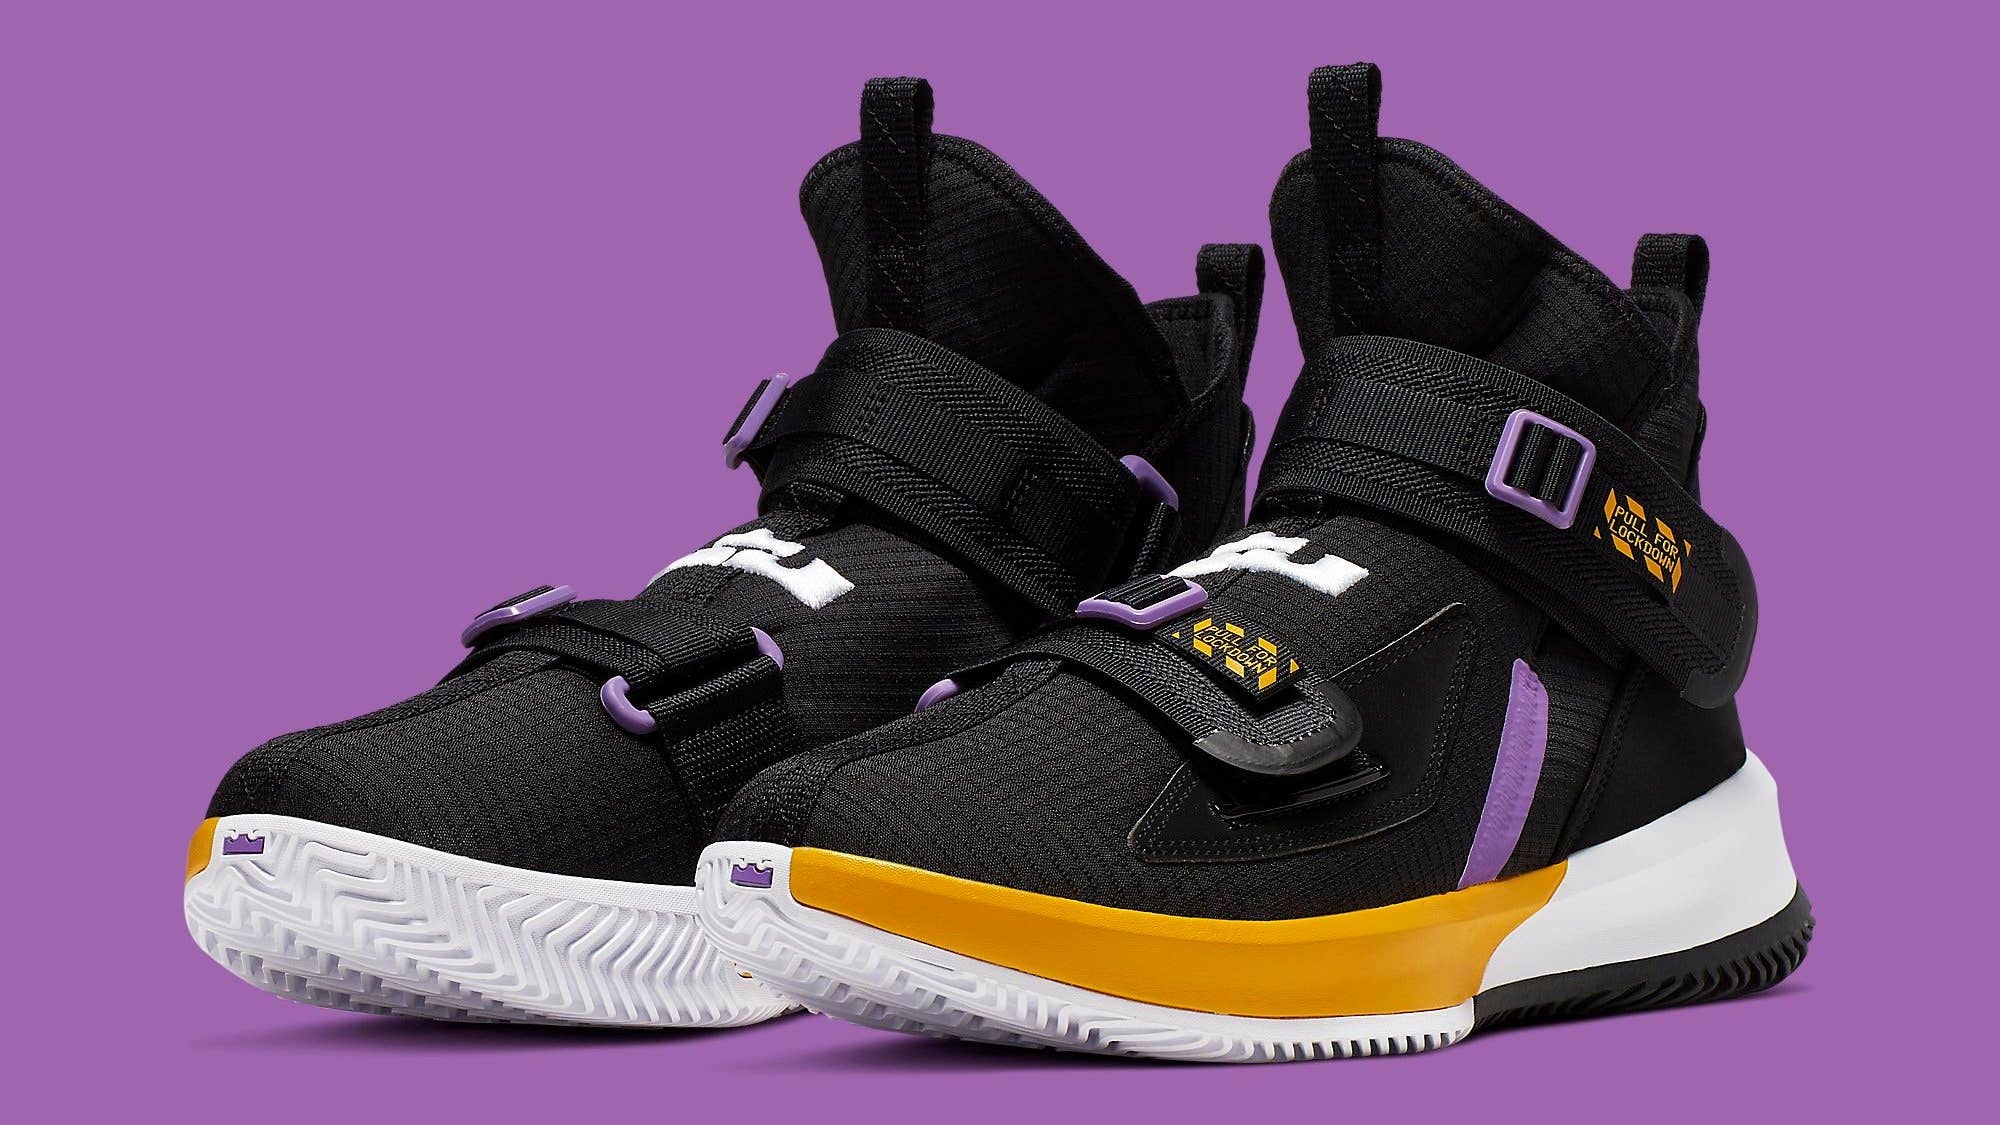 Nike LeBron Soldier 13 Lakers Release Date AR4228 004 Pair